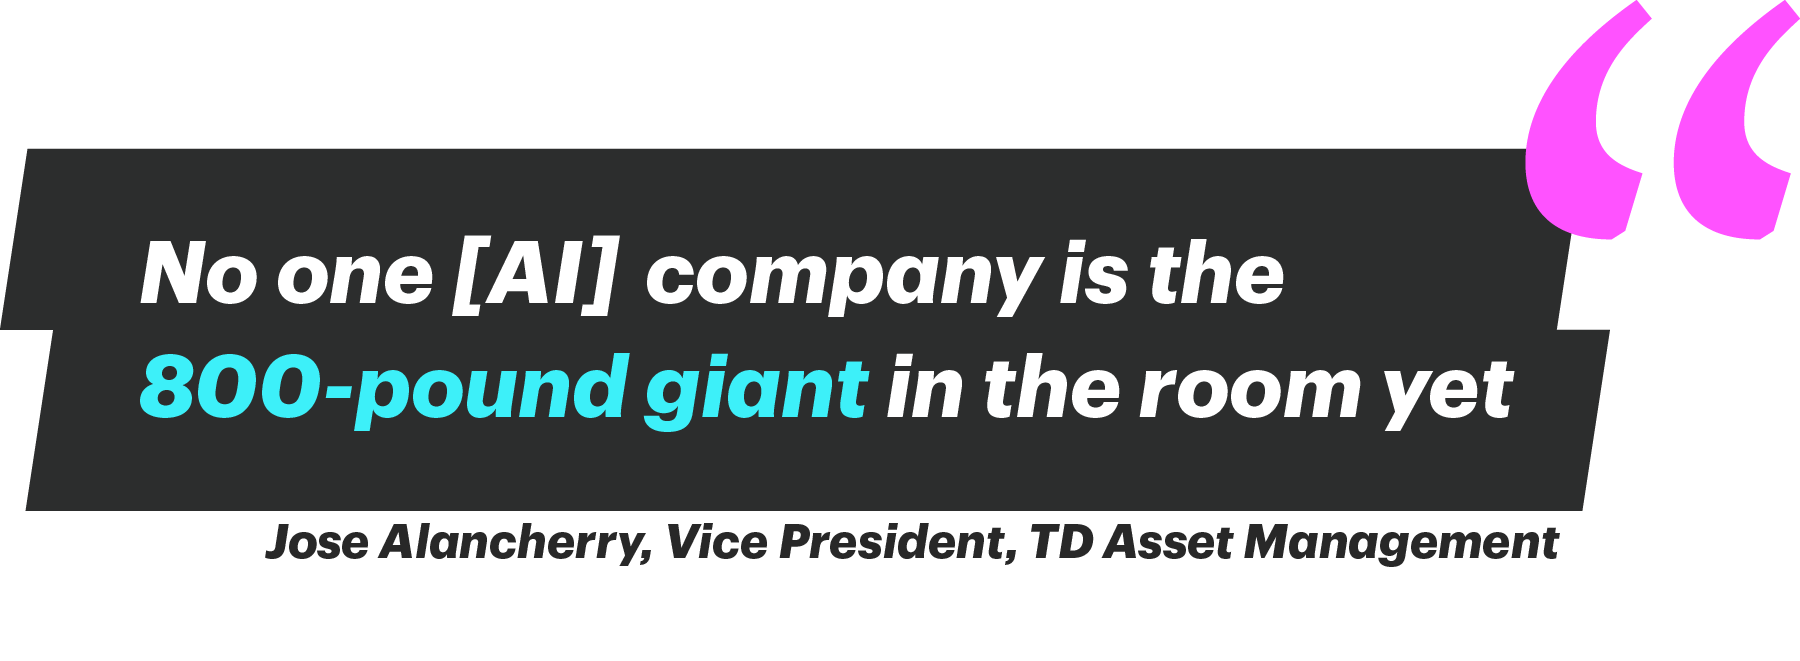 "No one [AI] company is the 800-pound giant in the room yet" - Jose Alancherry, Vice President, TD Asset Management